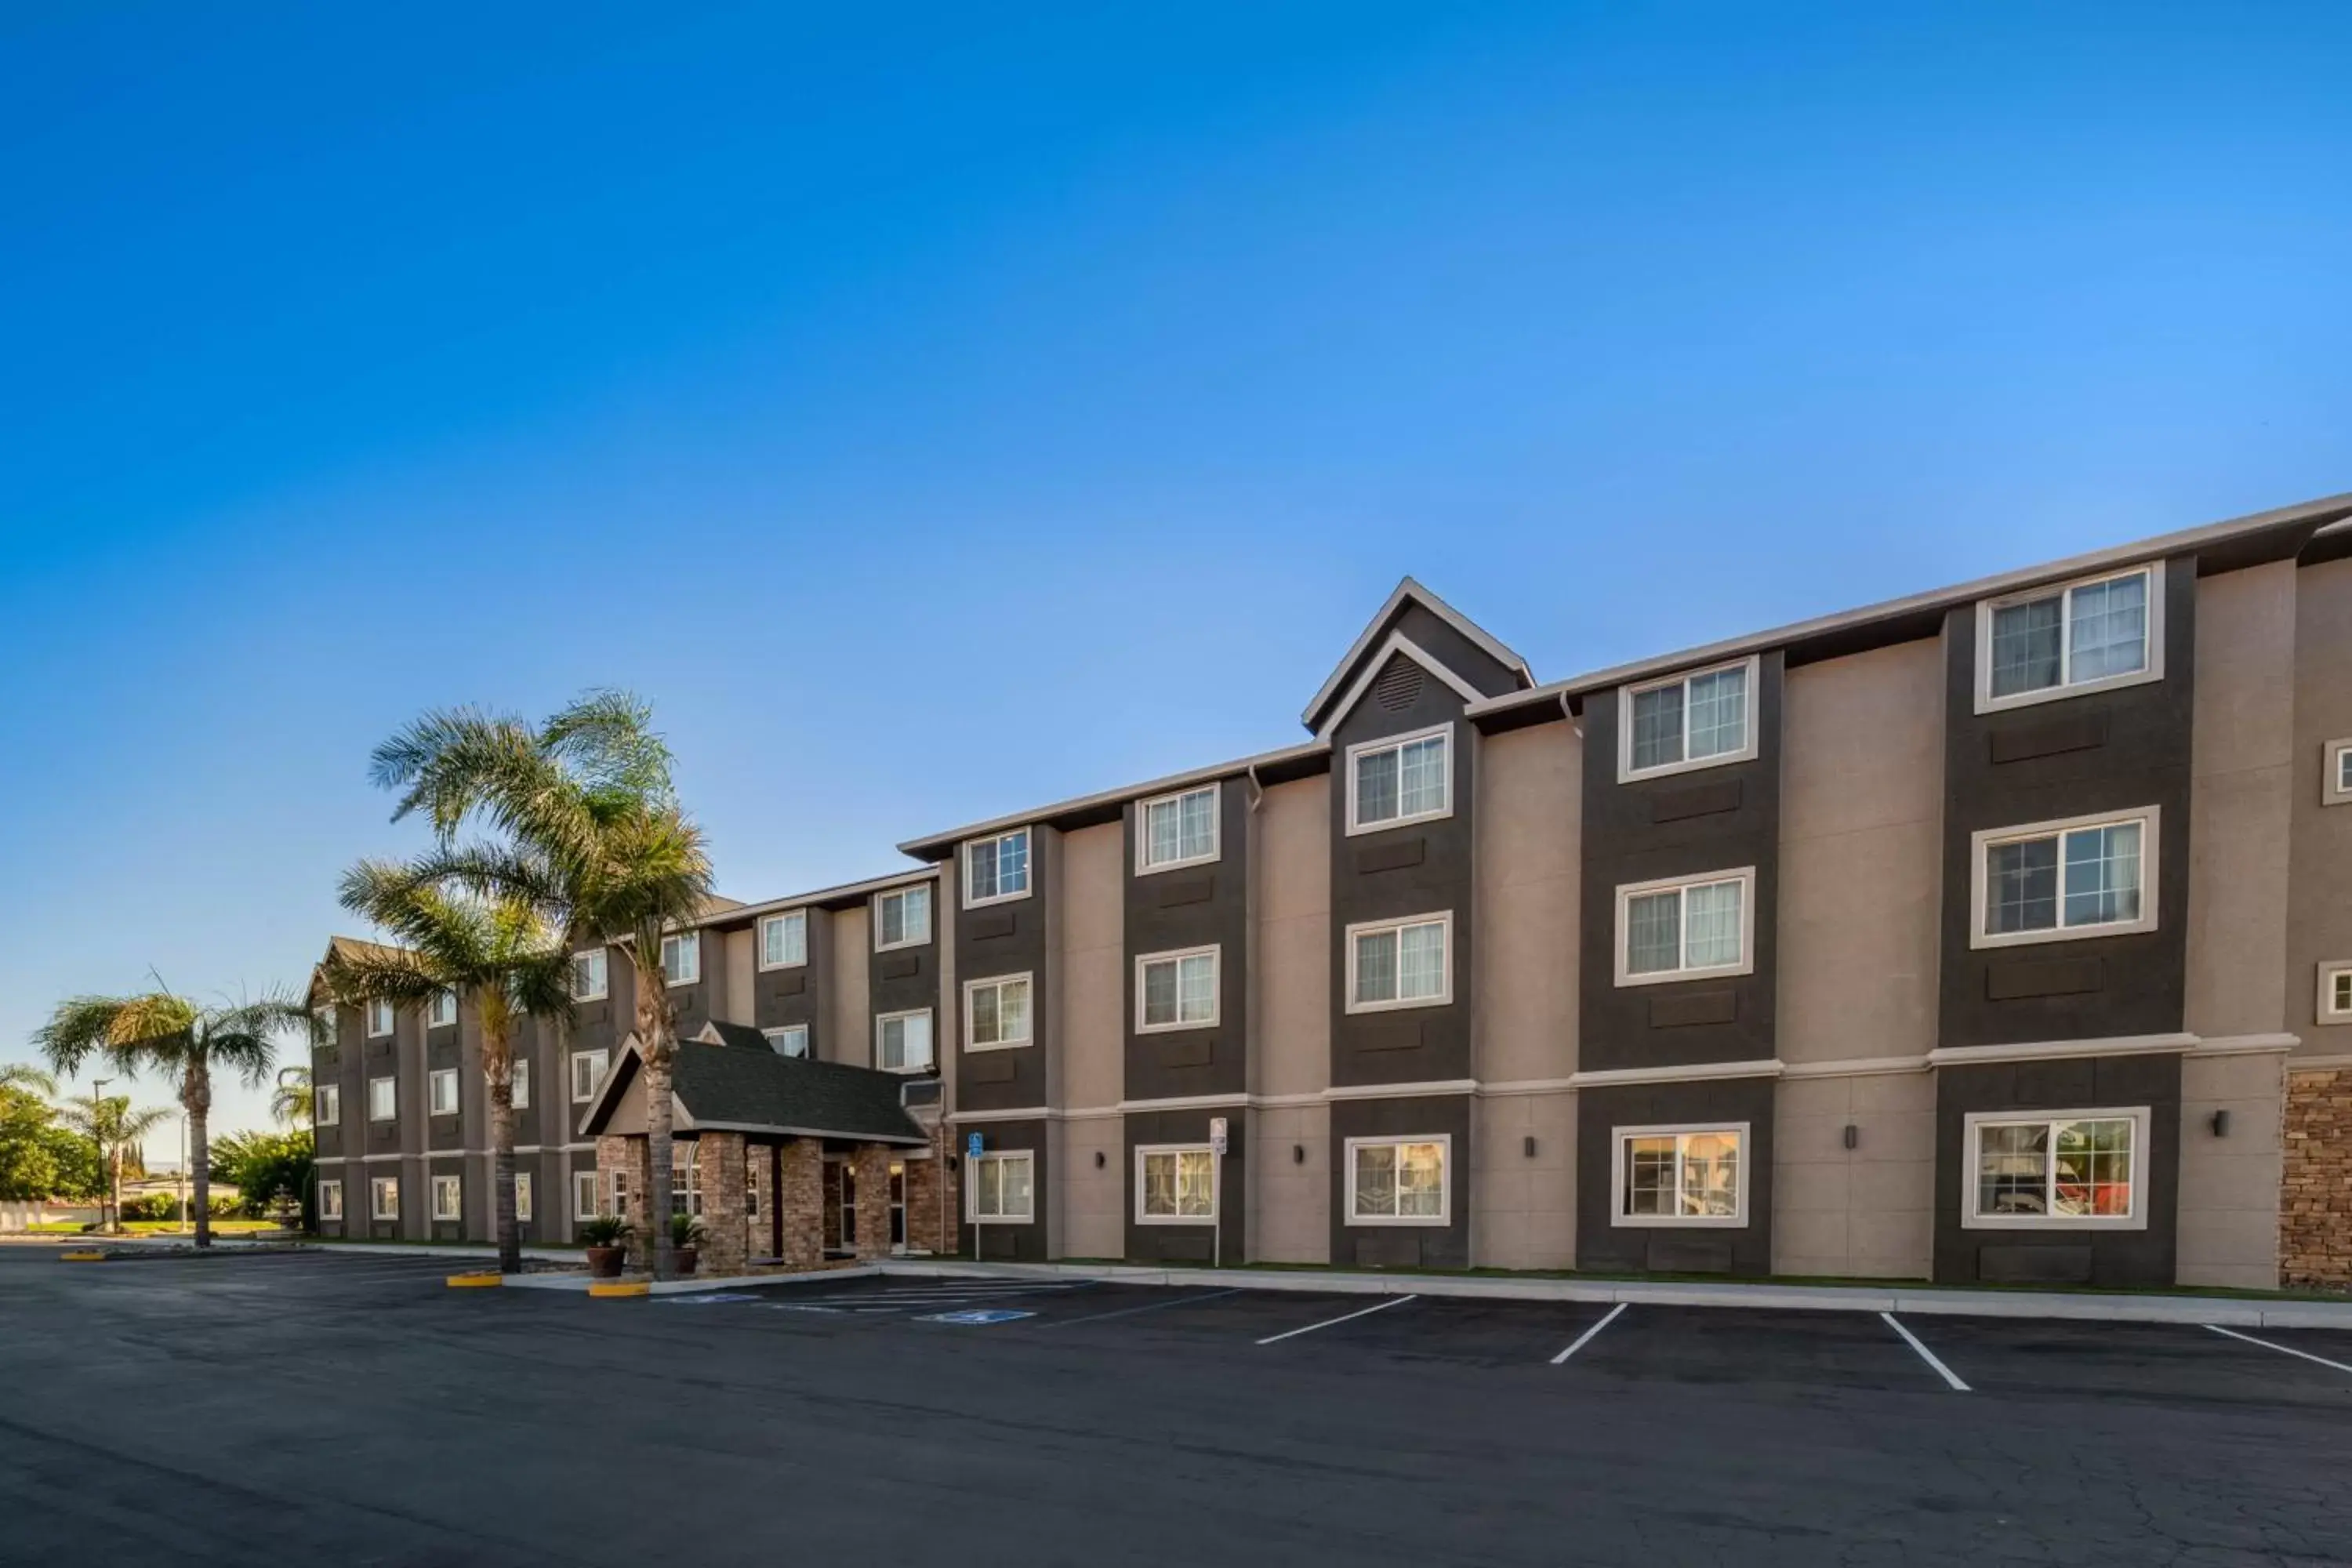 Property Building in Microtel Inn & Suites by Wyndham Tracy